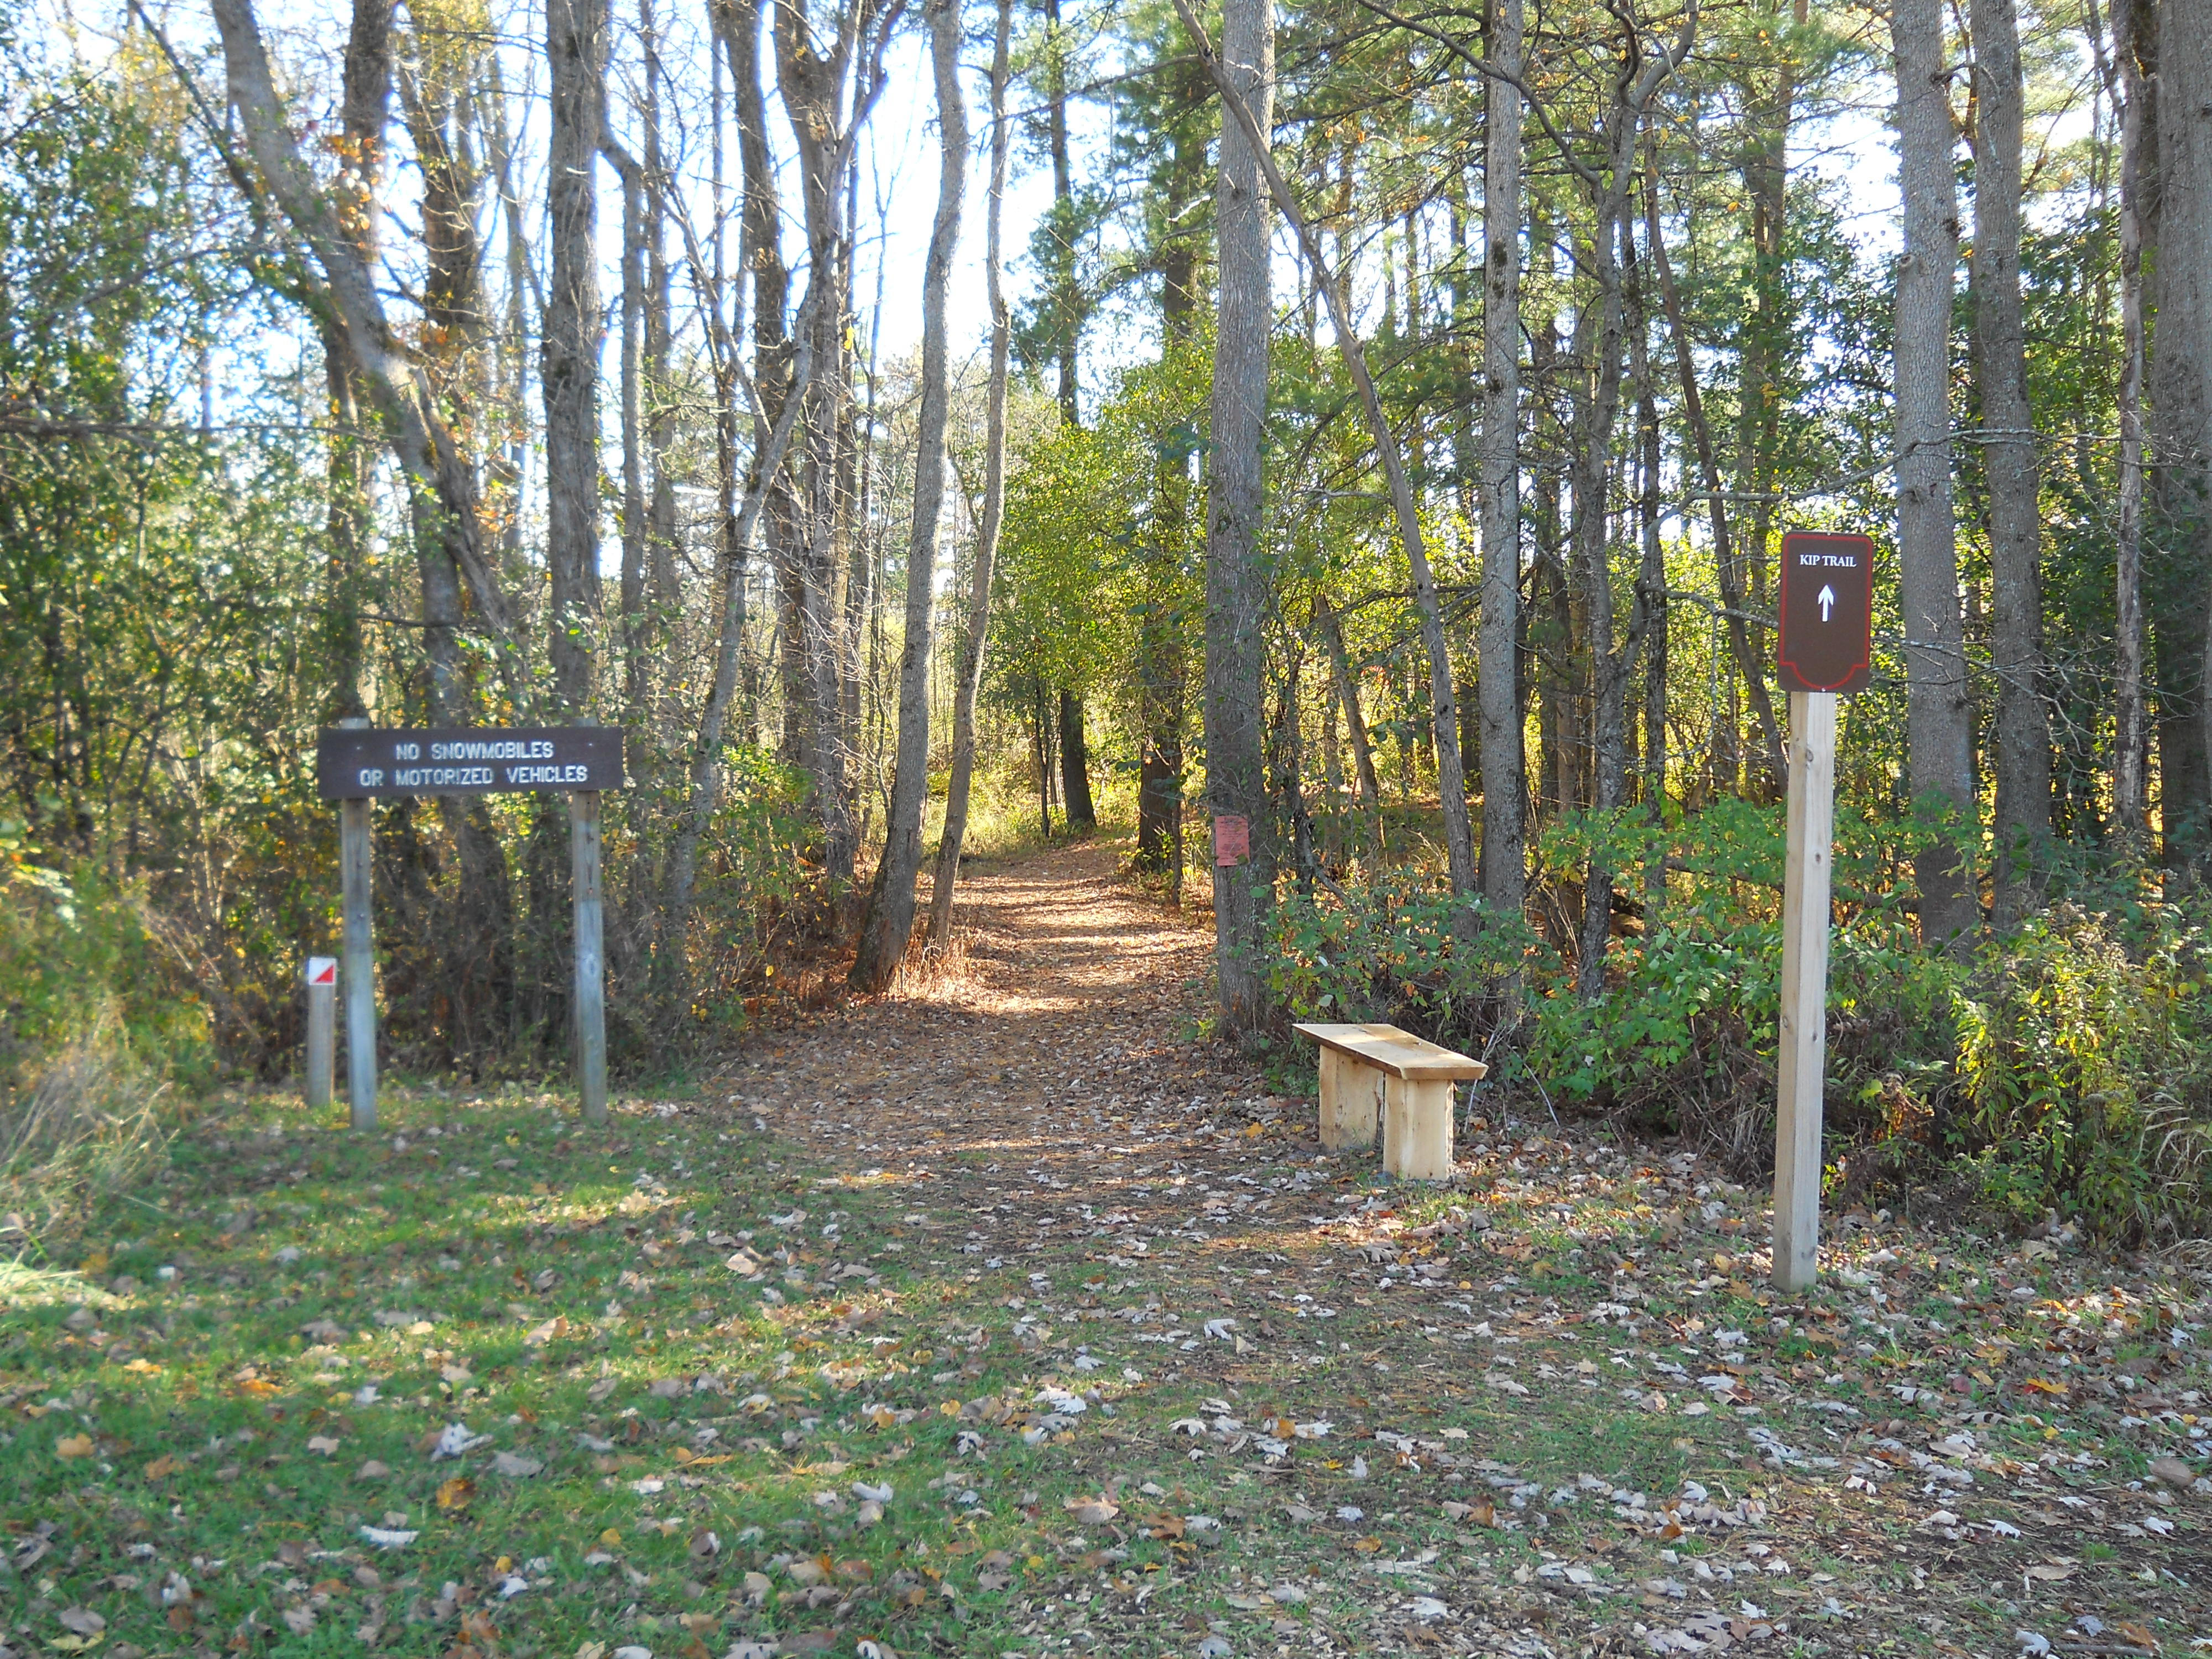 The orienteering course is located at Wachtmiester Field Station, near the start of the Kip Trail.